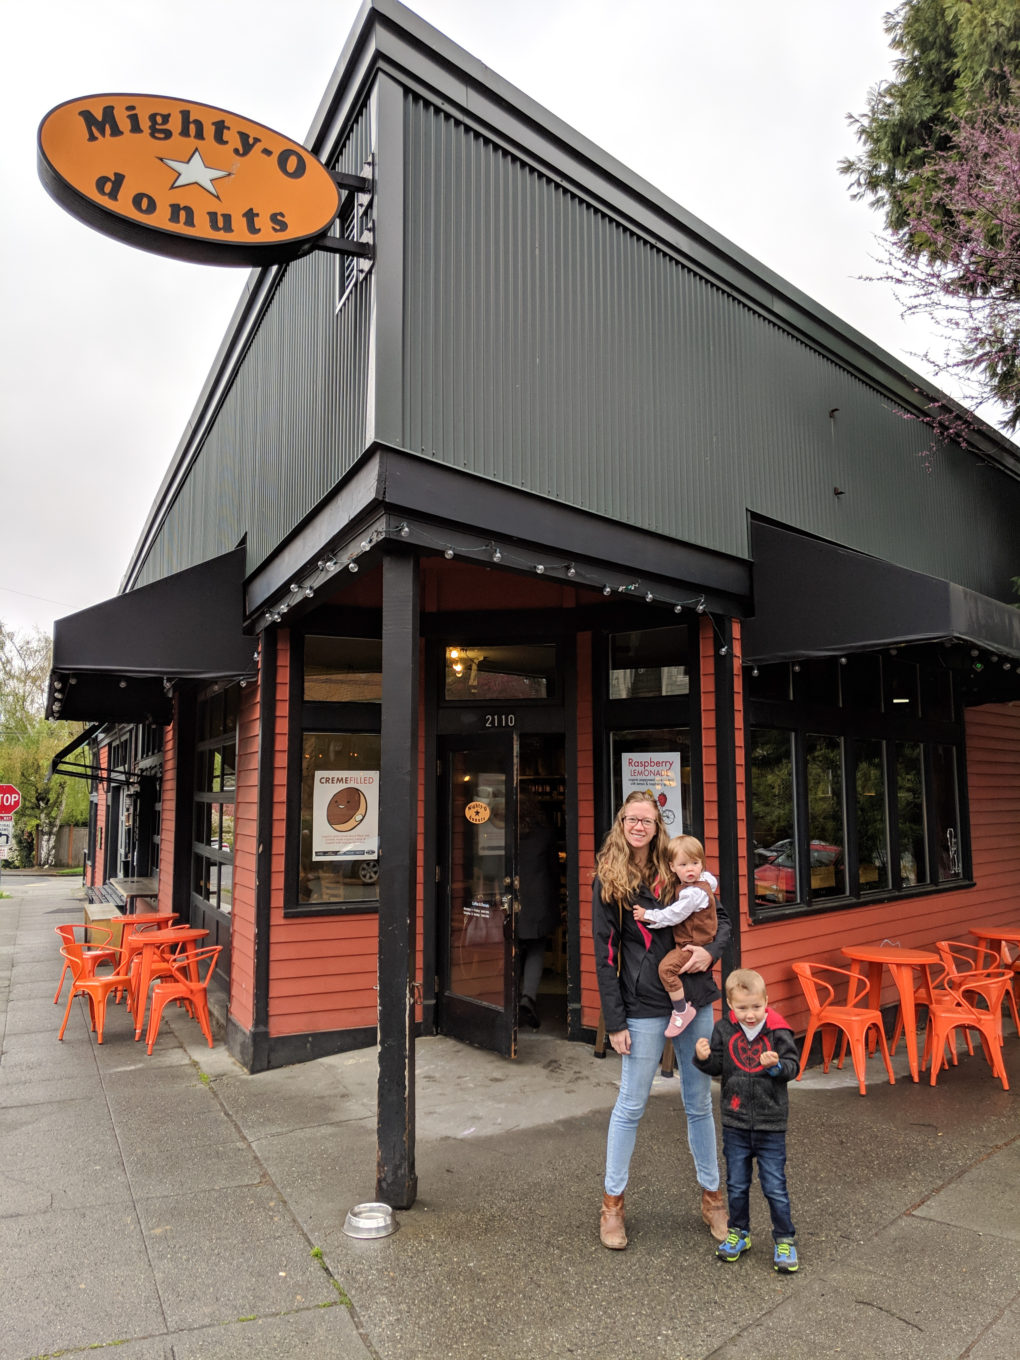 Mighty O Donuts - How to visit Seattle with kids on a 3 day trip. Fun activities to do and where to eat.